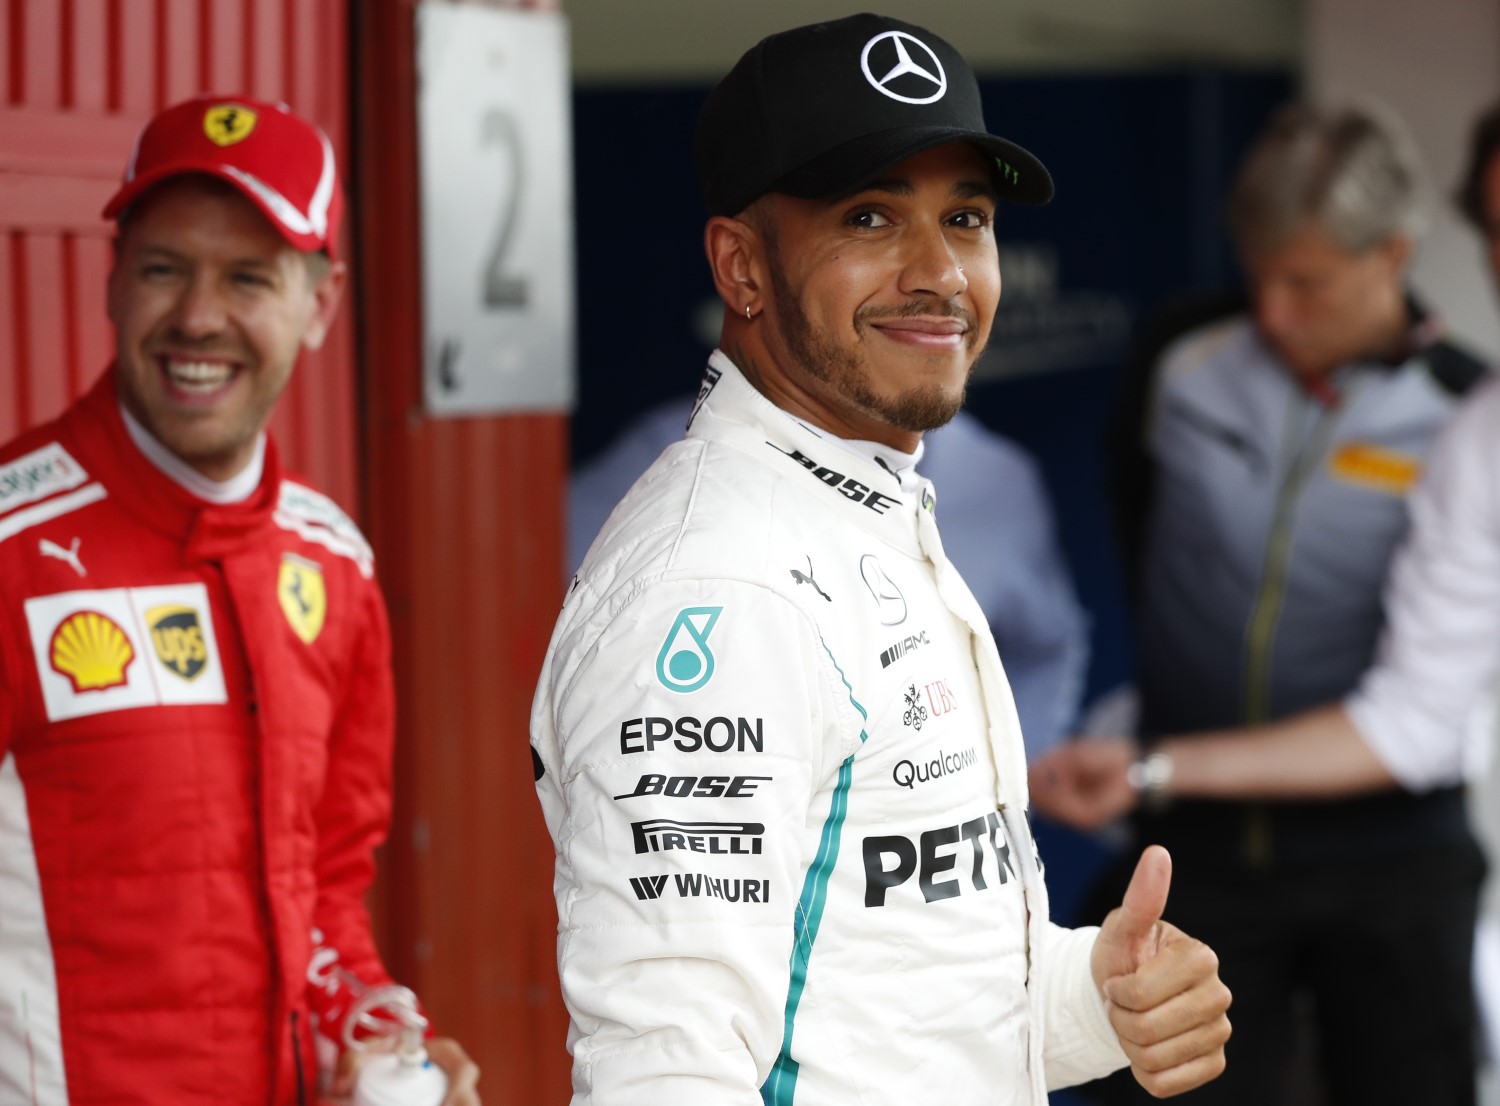 Rumor was Hamilton wasn't going to stay with Mercedes if he did not have the superior car. Aldo Costa has agin delivered that as the Mercedes cars are now superior again. Hamilton cannot lose.